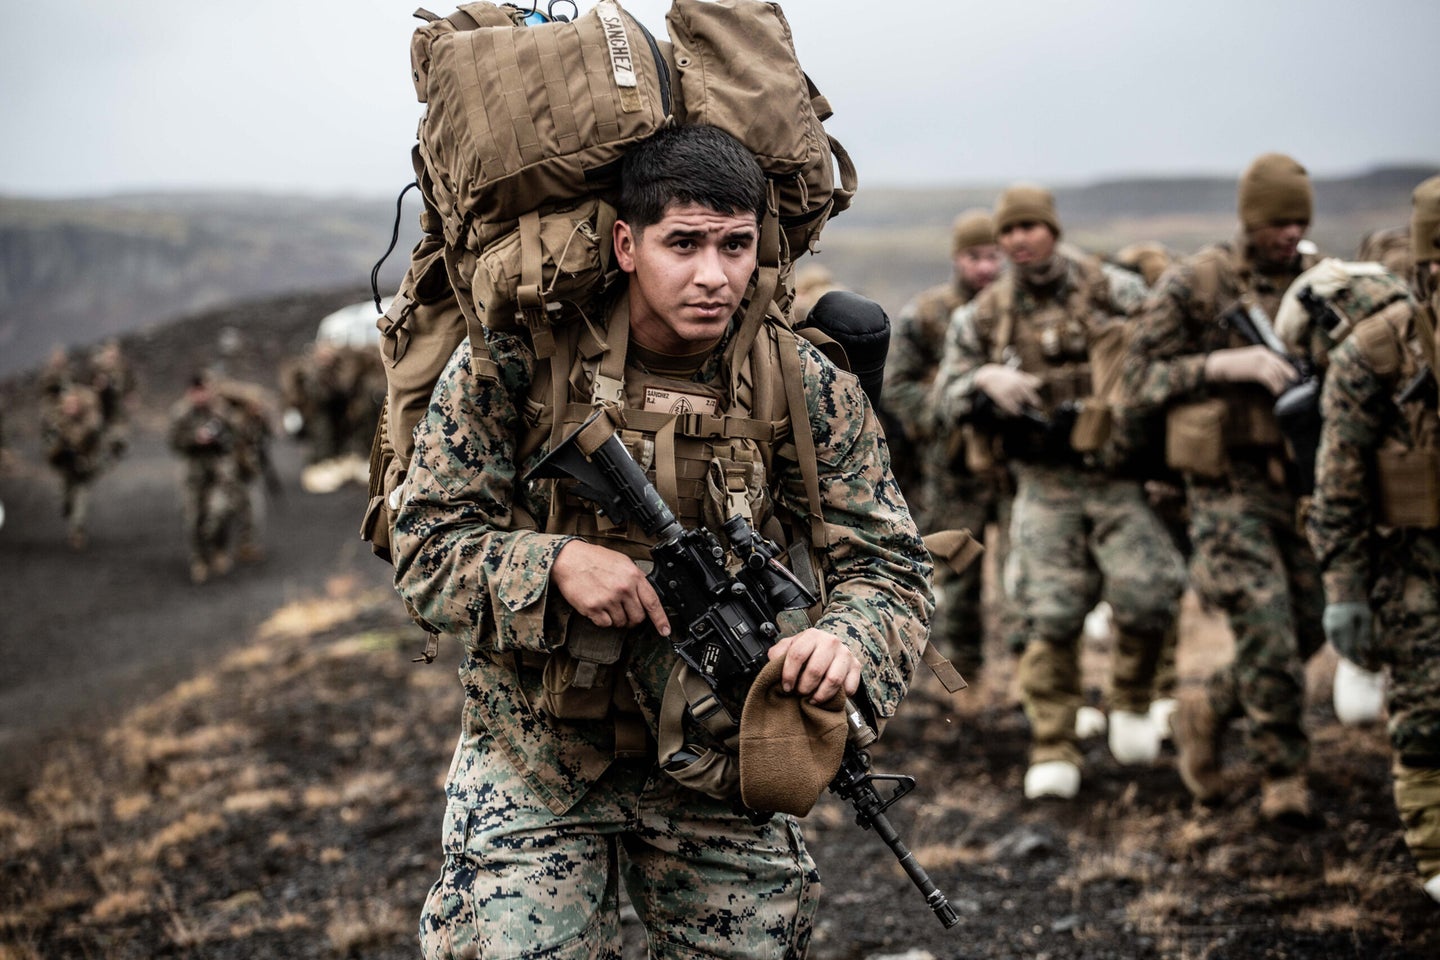 A U.S. Marine with the 24th Marine Expeditionary Unit (MEU) carries cold weather equipment as he begins to march across the Icelandic terrain October 19, 2018. The 24th MEU was in Iceland preparing for NATO Exercise Trident Juncture 2018. The main phase of Trident Juncture will start in Norway on October 25. The exercise will bring together around 50,000 personnel from all 29 Allies plus partners Finland and Sweden.



Photo by Jack Sommerville